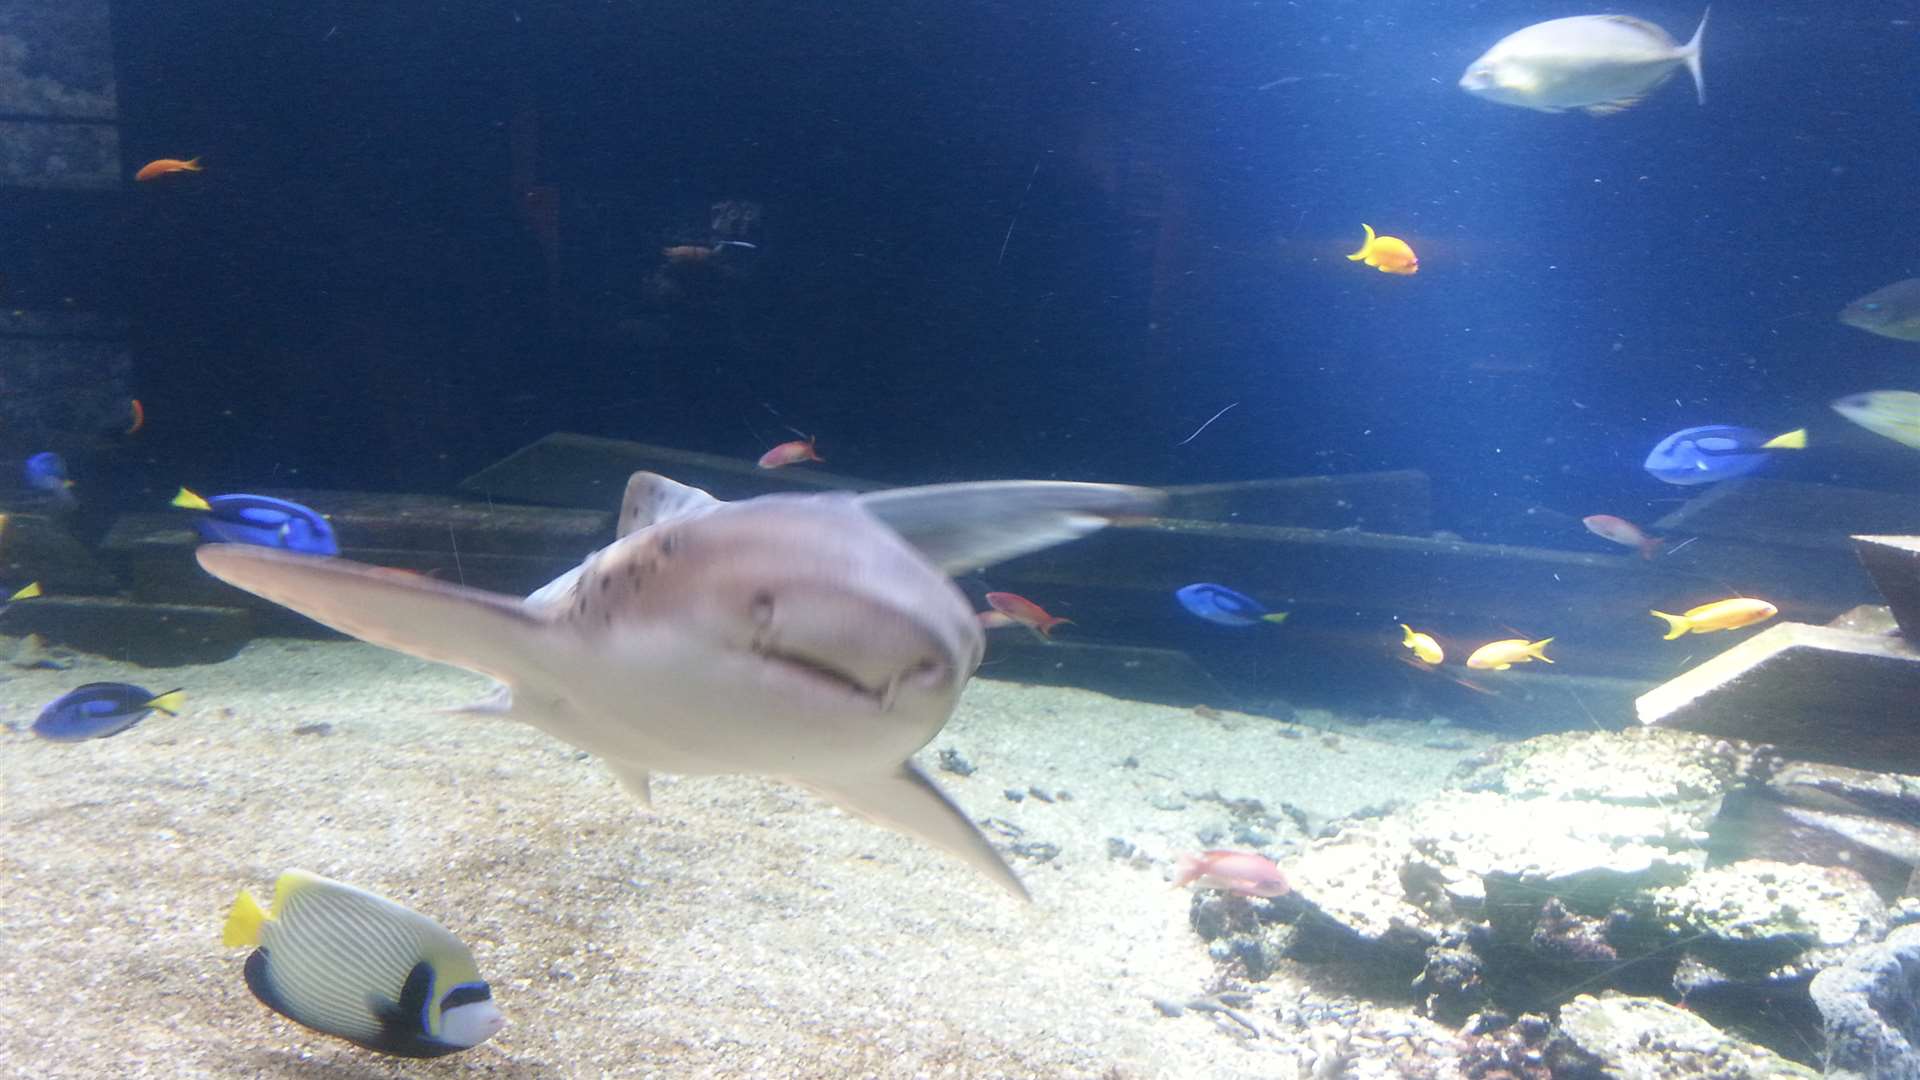 The Shark Aquarium is one of the centre's most popular areas